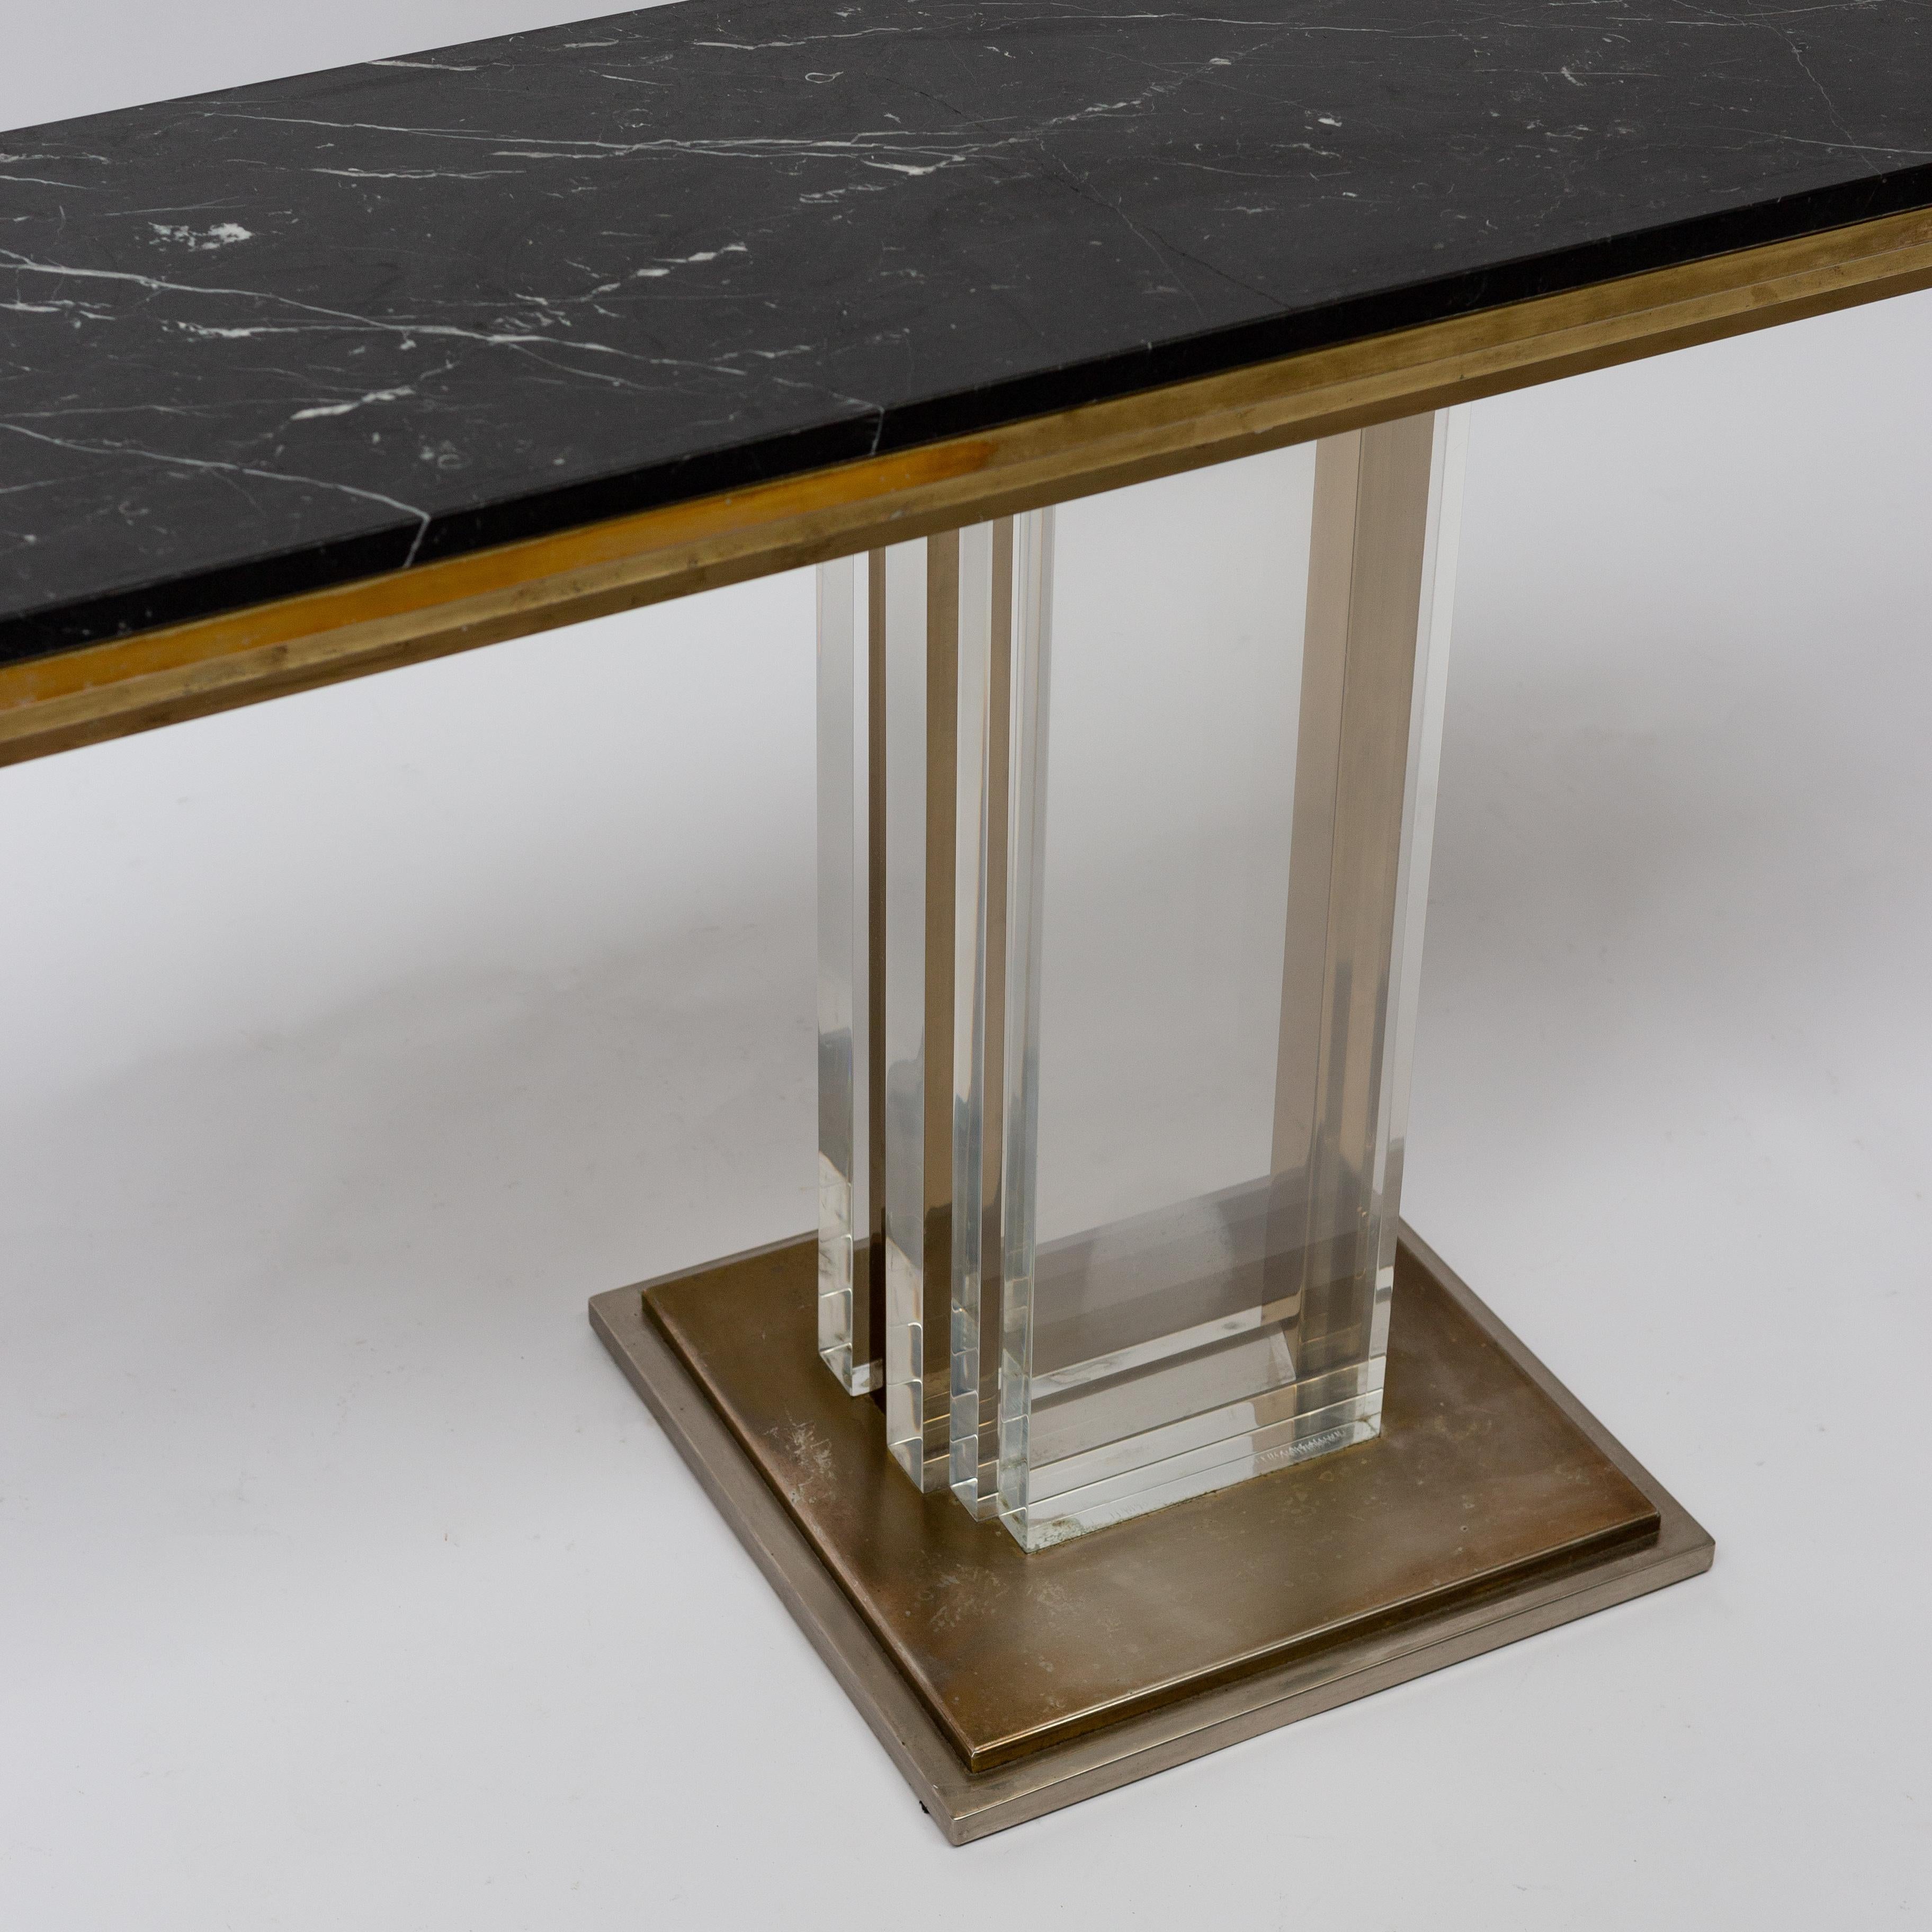 Stunning console table full brass and chrome metal, tick black marble top, by Willy Rizzo. 
Rare manufacturing plexiglass model.